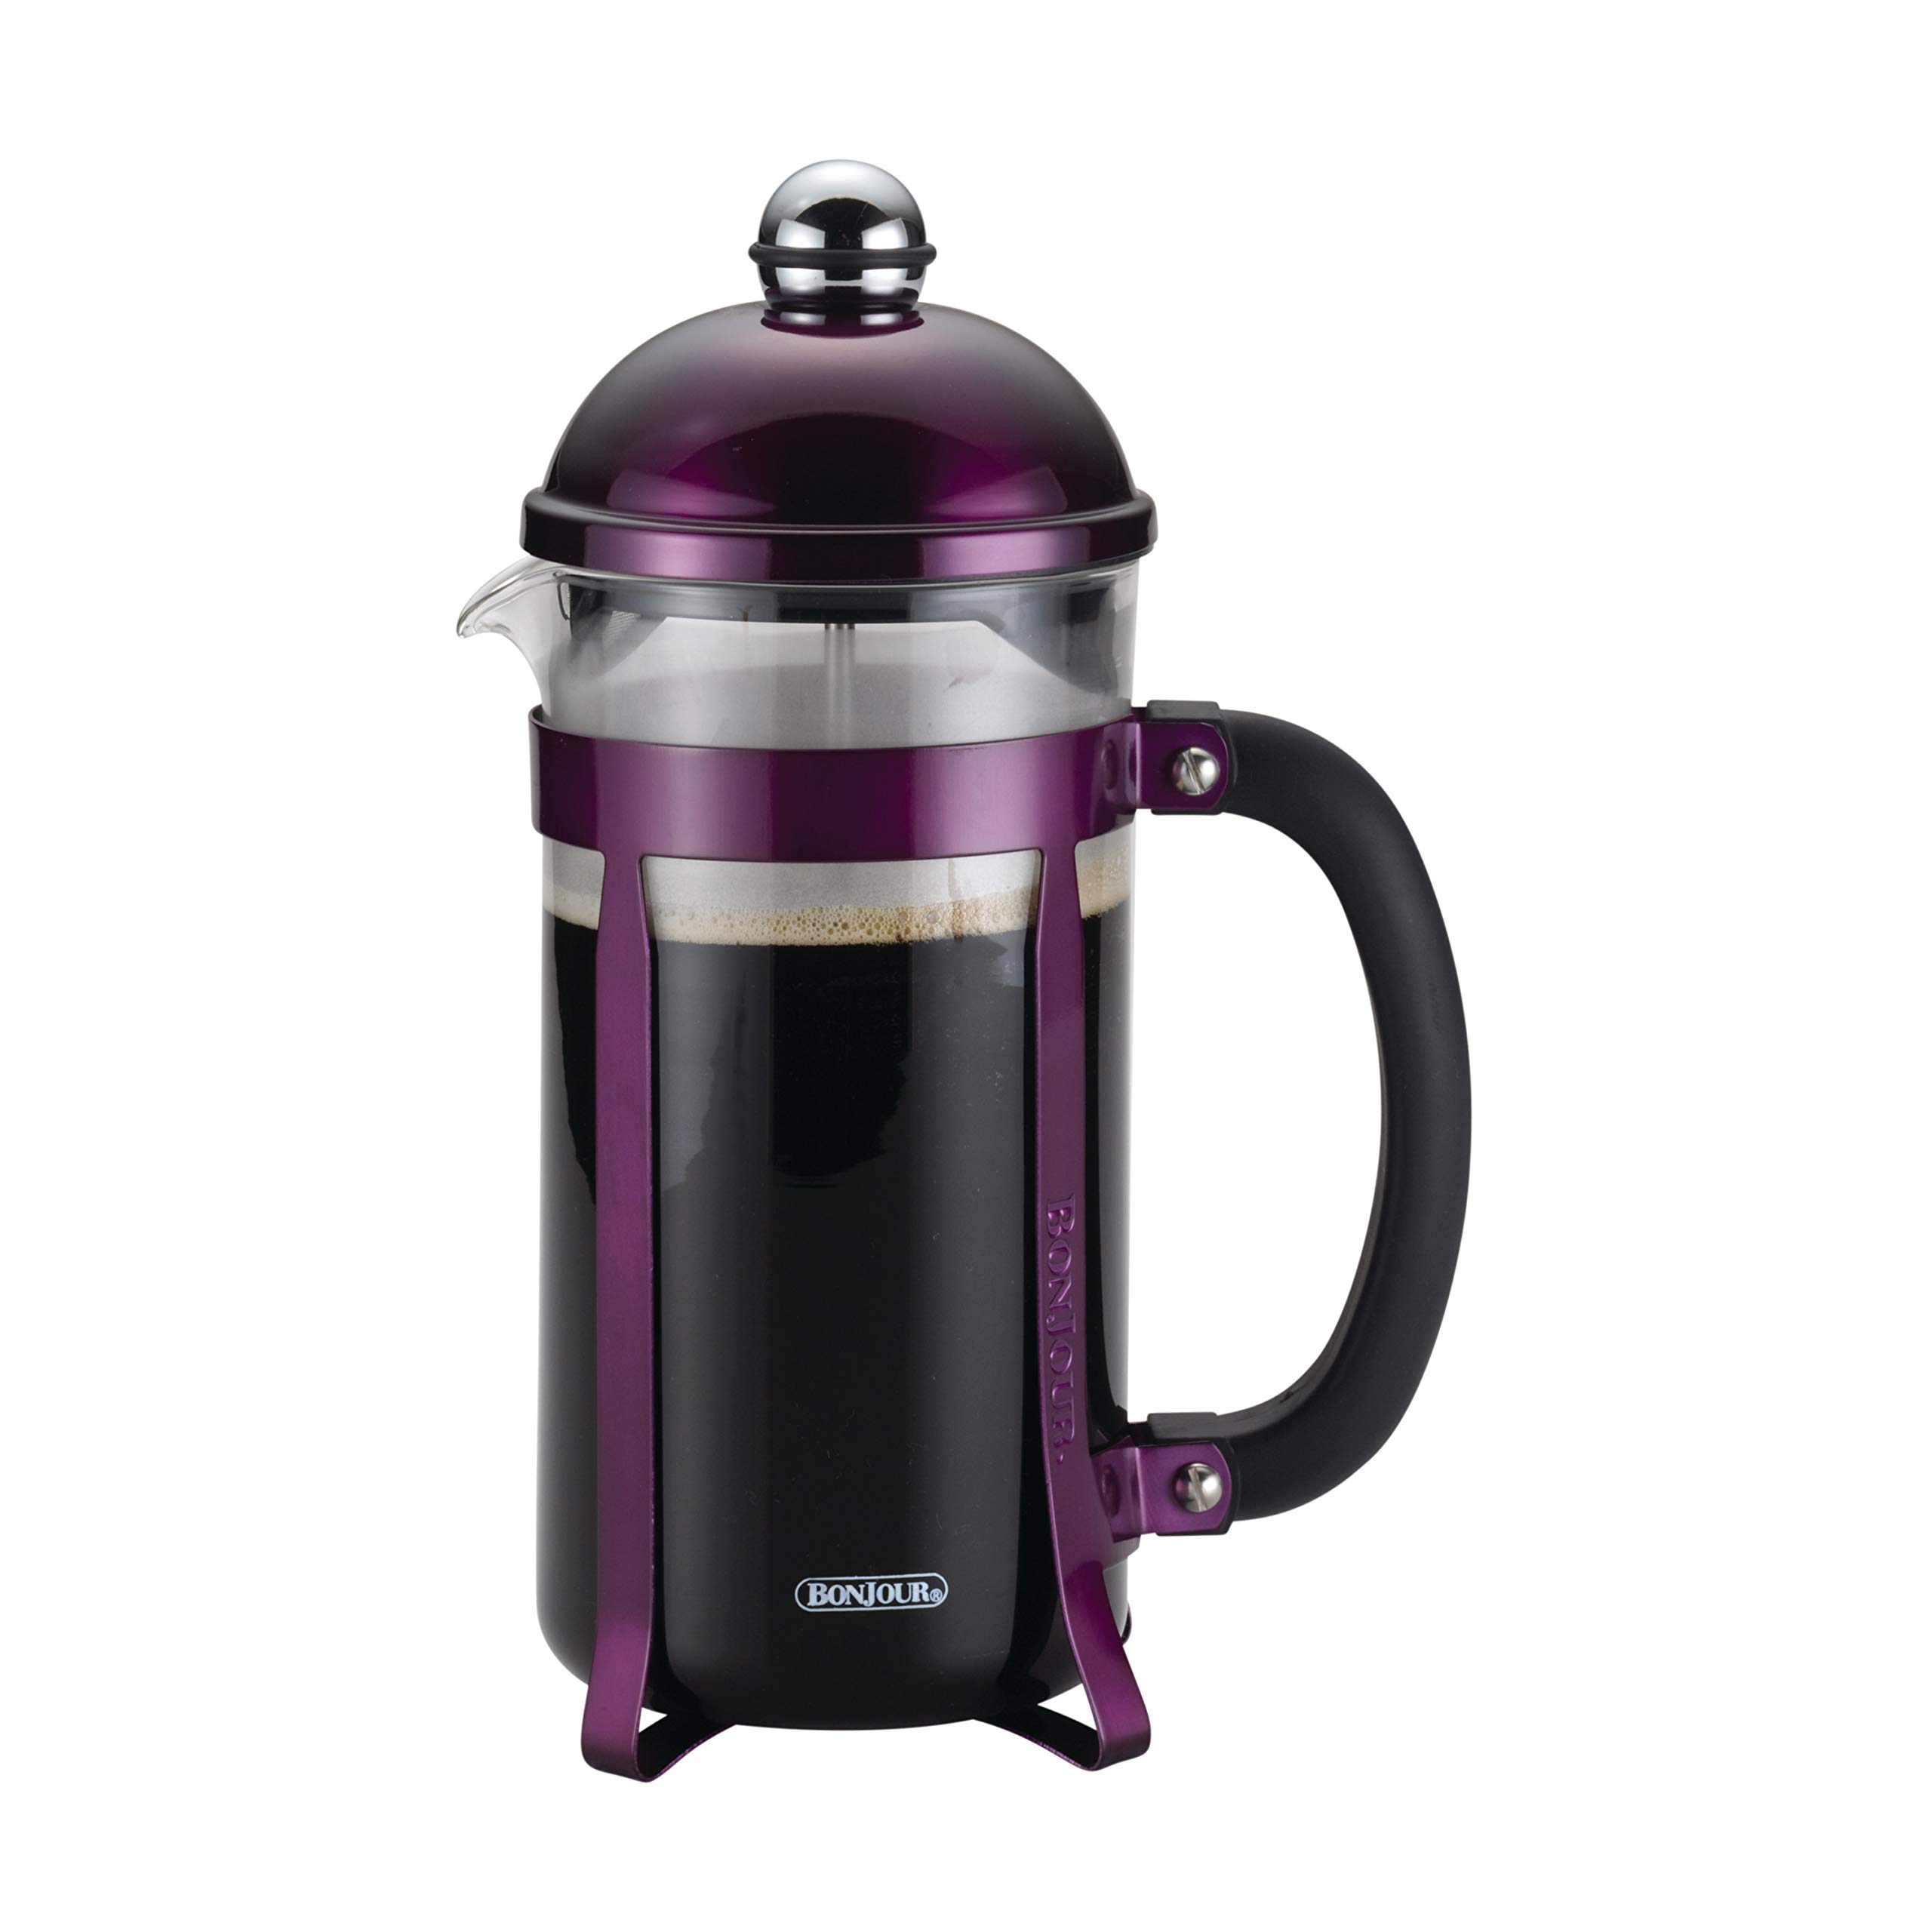 BonJour Maximus French Press Coffee Maker, 8 Cup, Purple